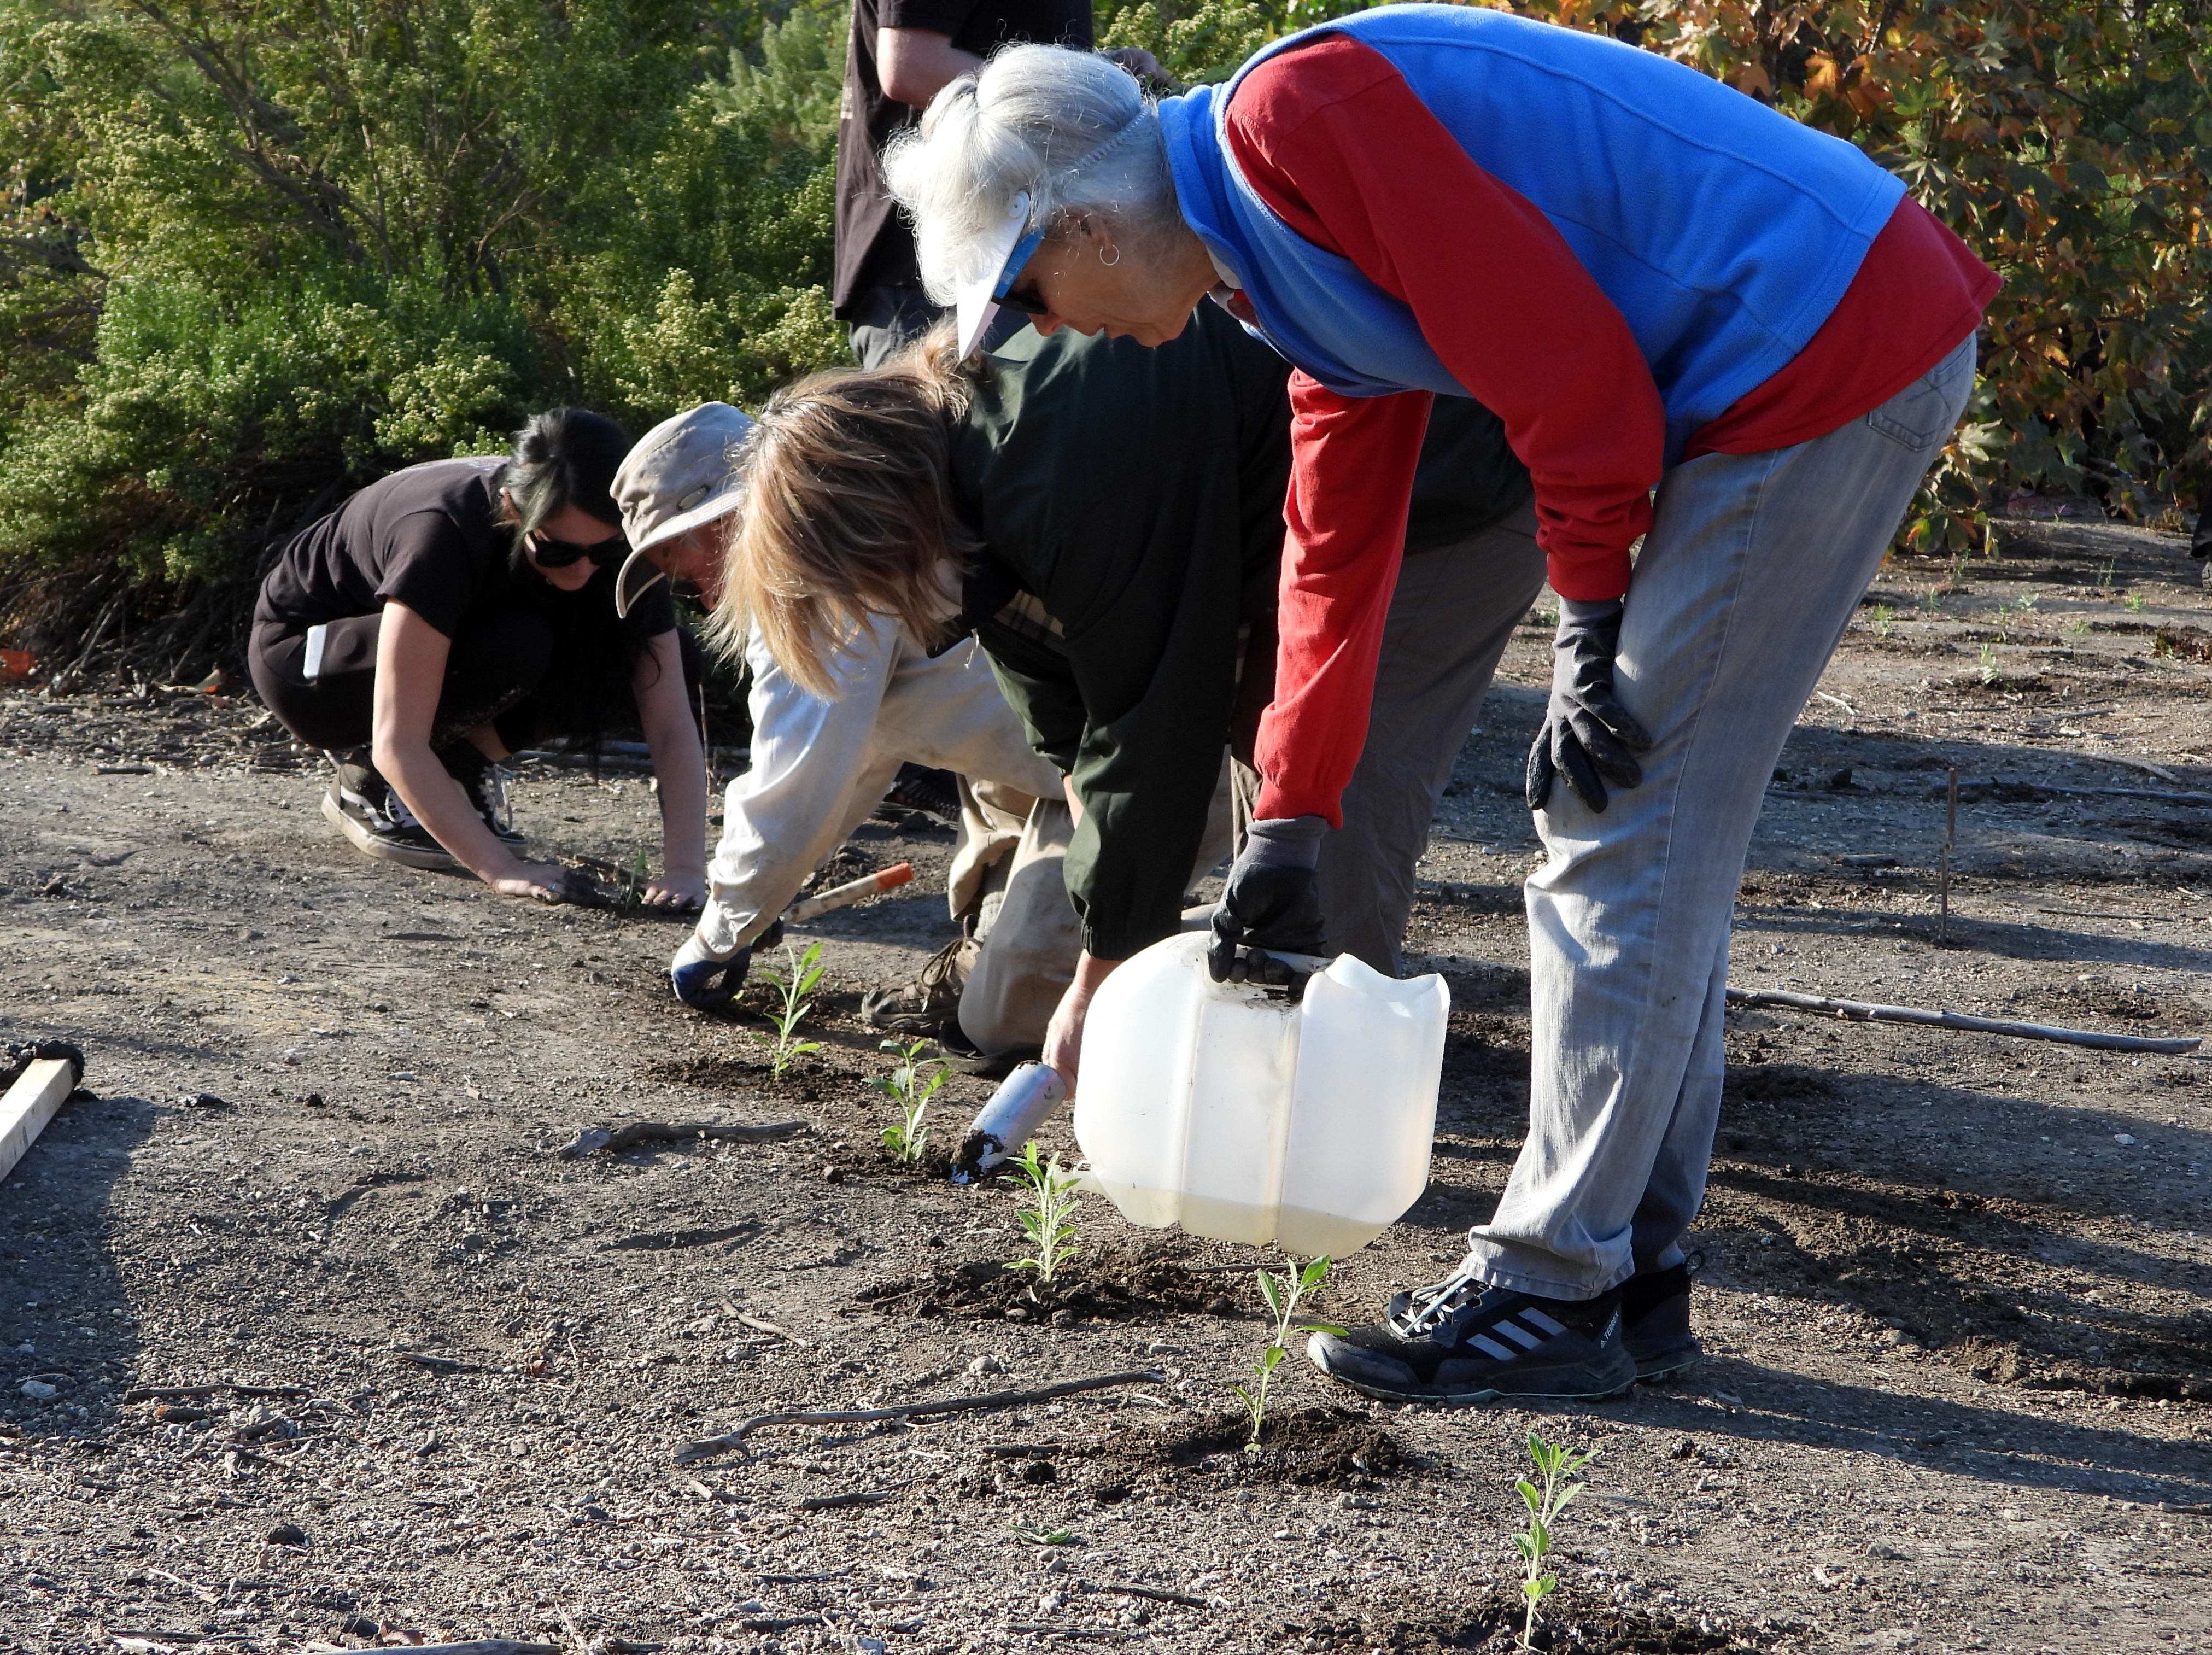 A row of plants is tended by a row of people, who are bending over each newly planted seedling. The person in the foreground is watering the plant with a plastic jug, while other people are patting down the soil around the plants.